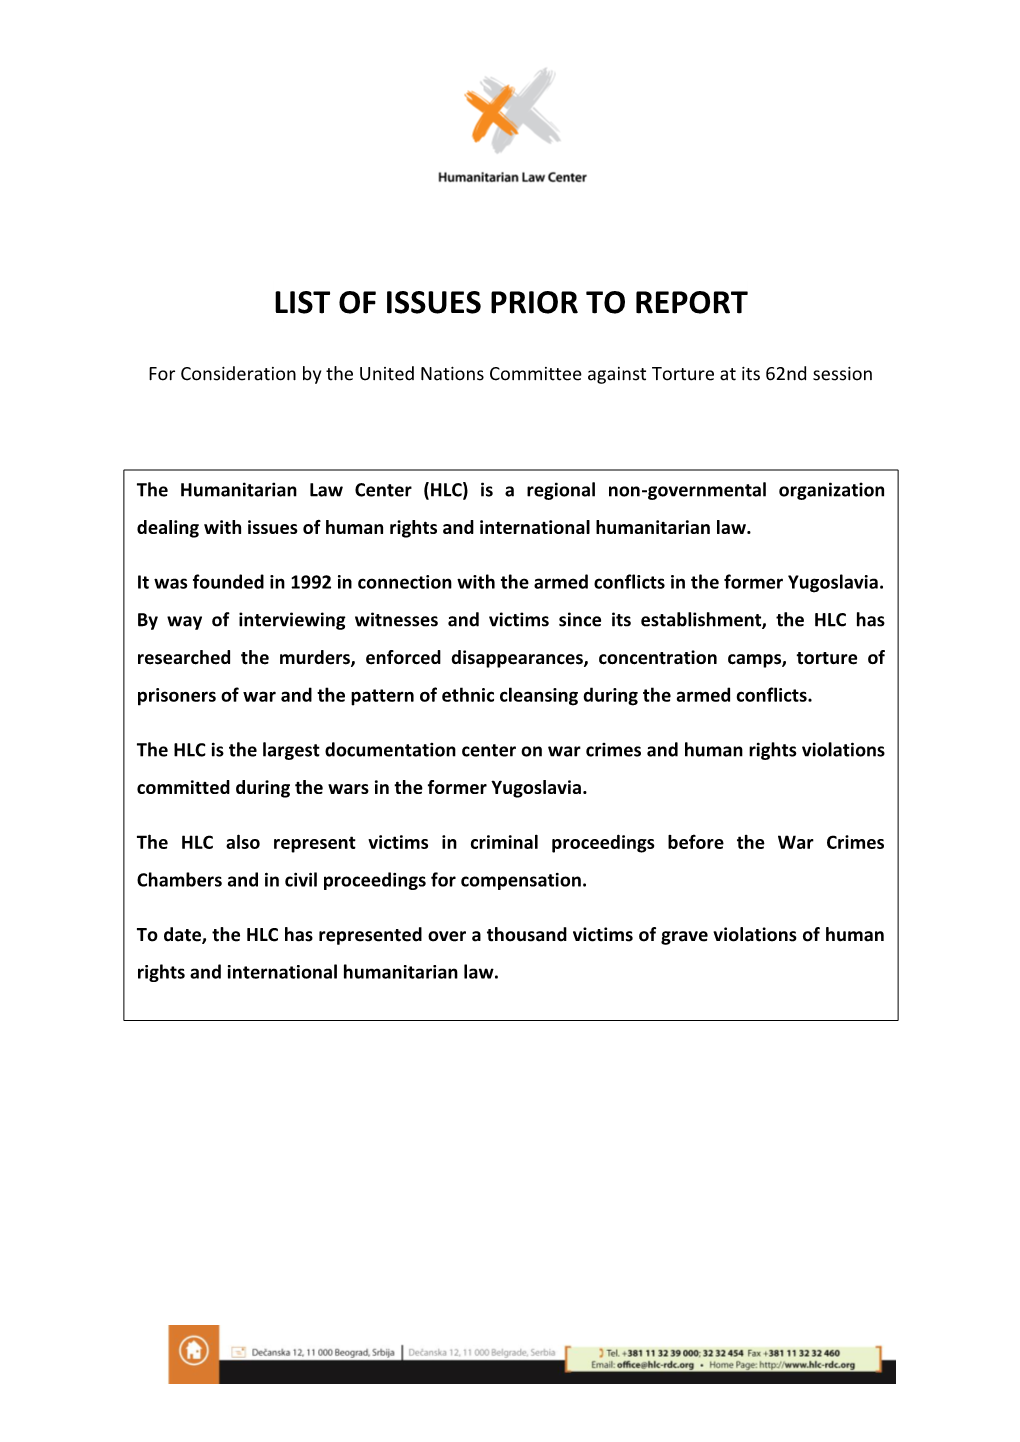 List of Issues Prior to Report